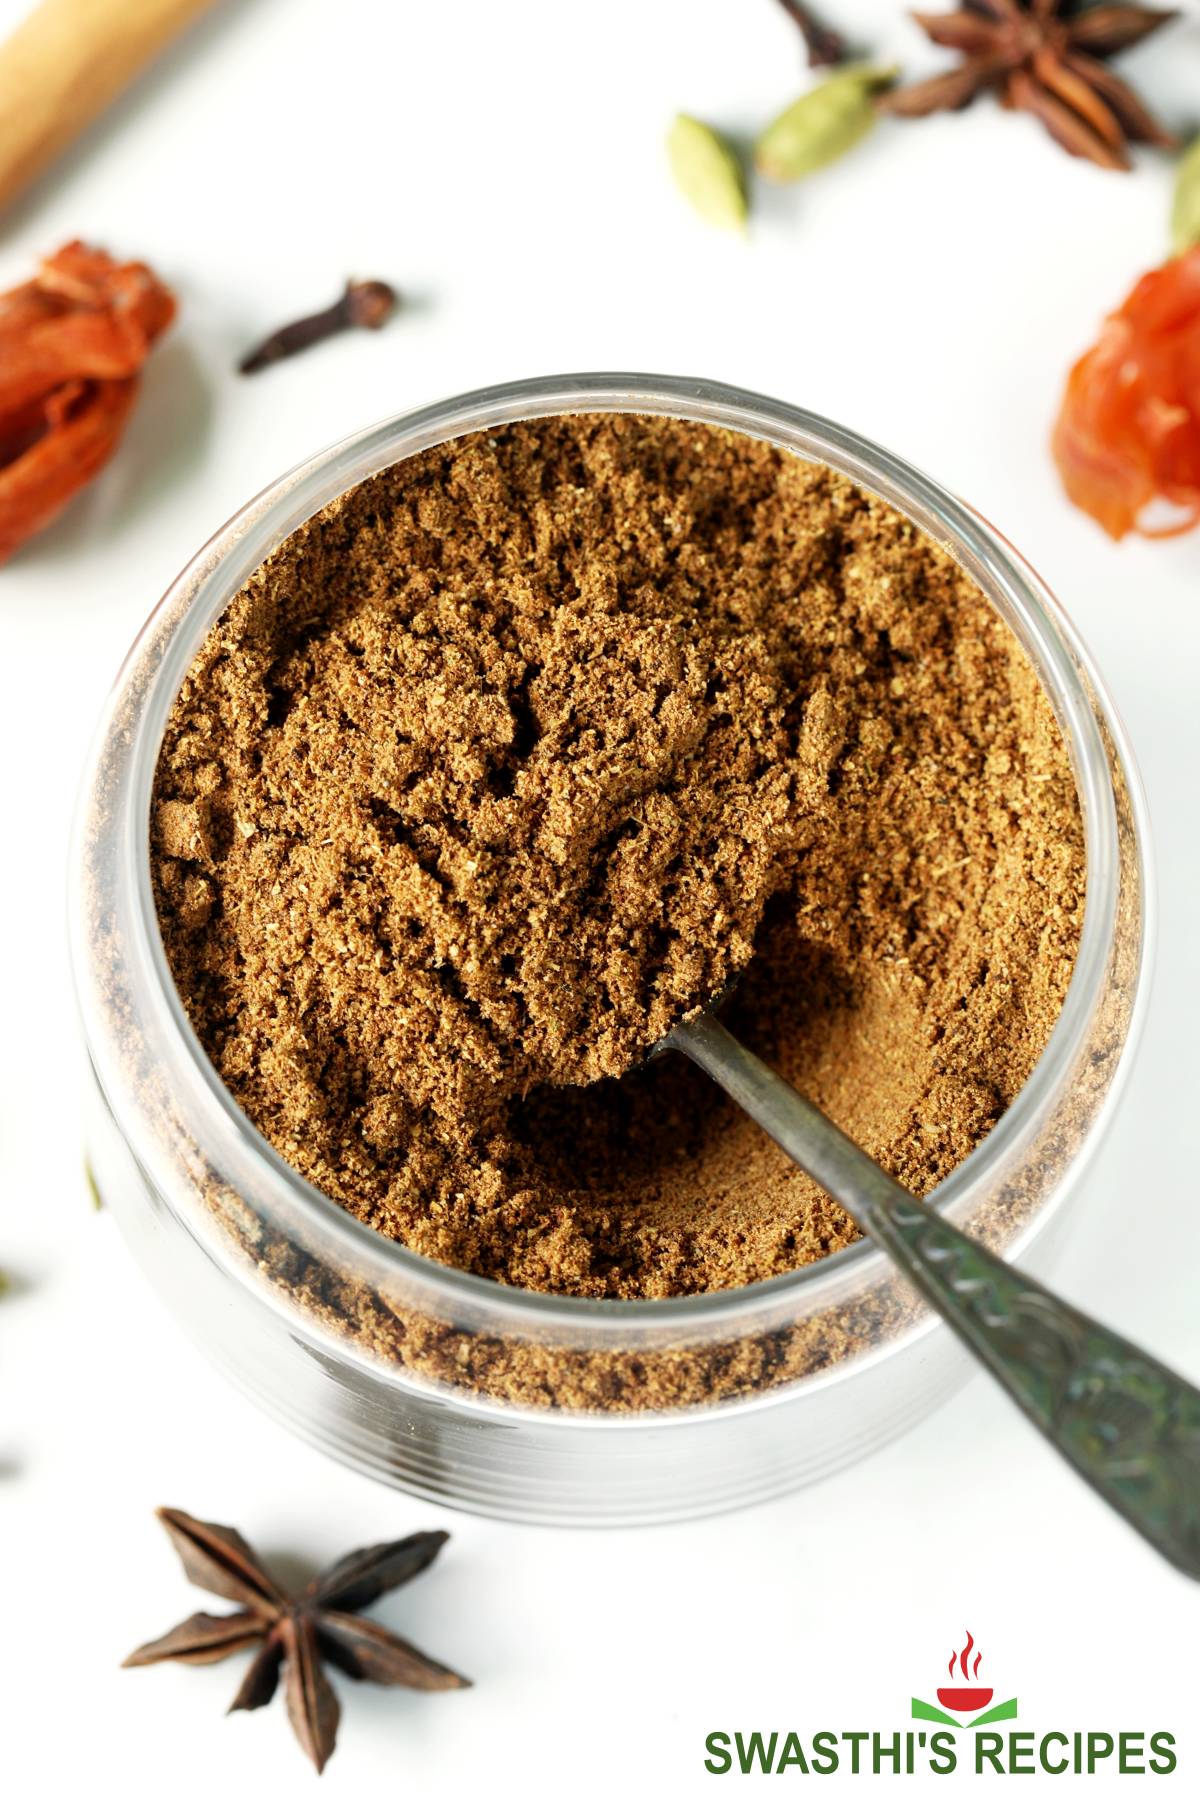 Garam Masala - Health Benefits, Uses and Important Facts